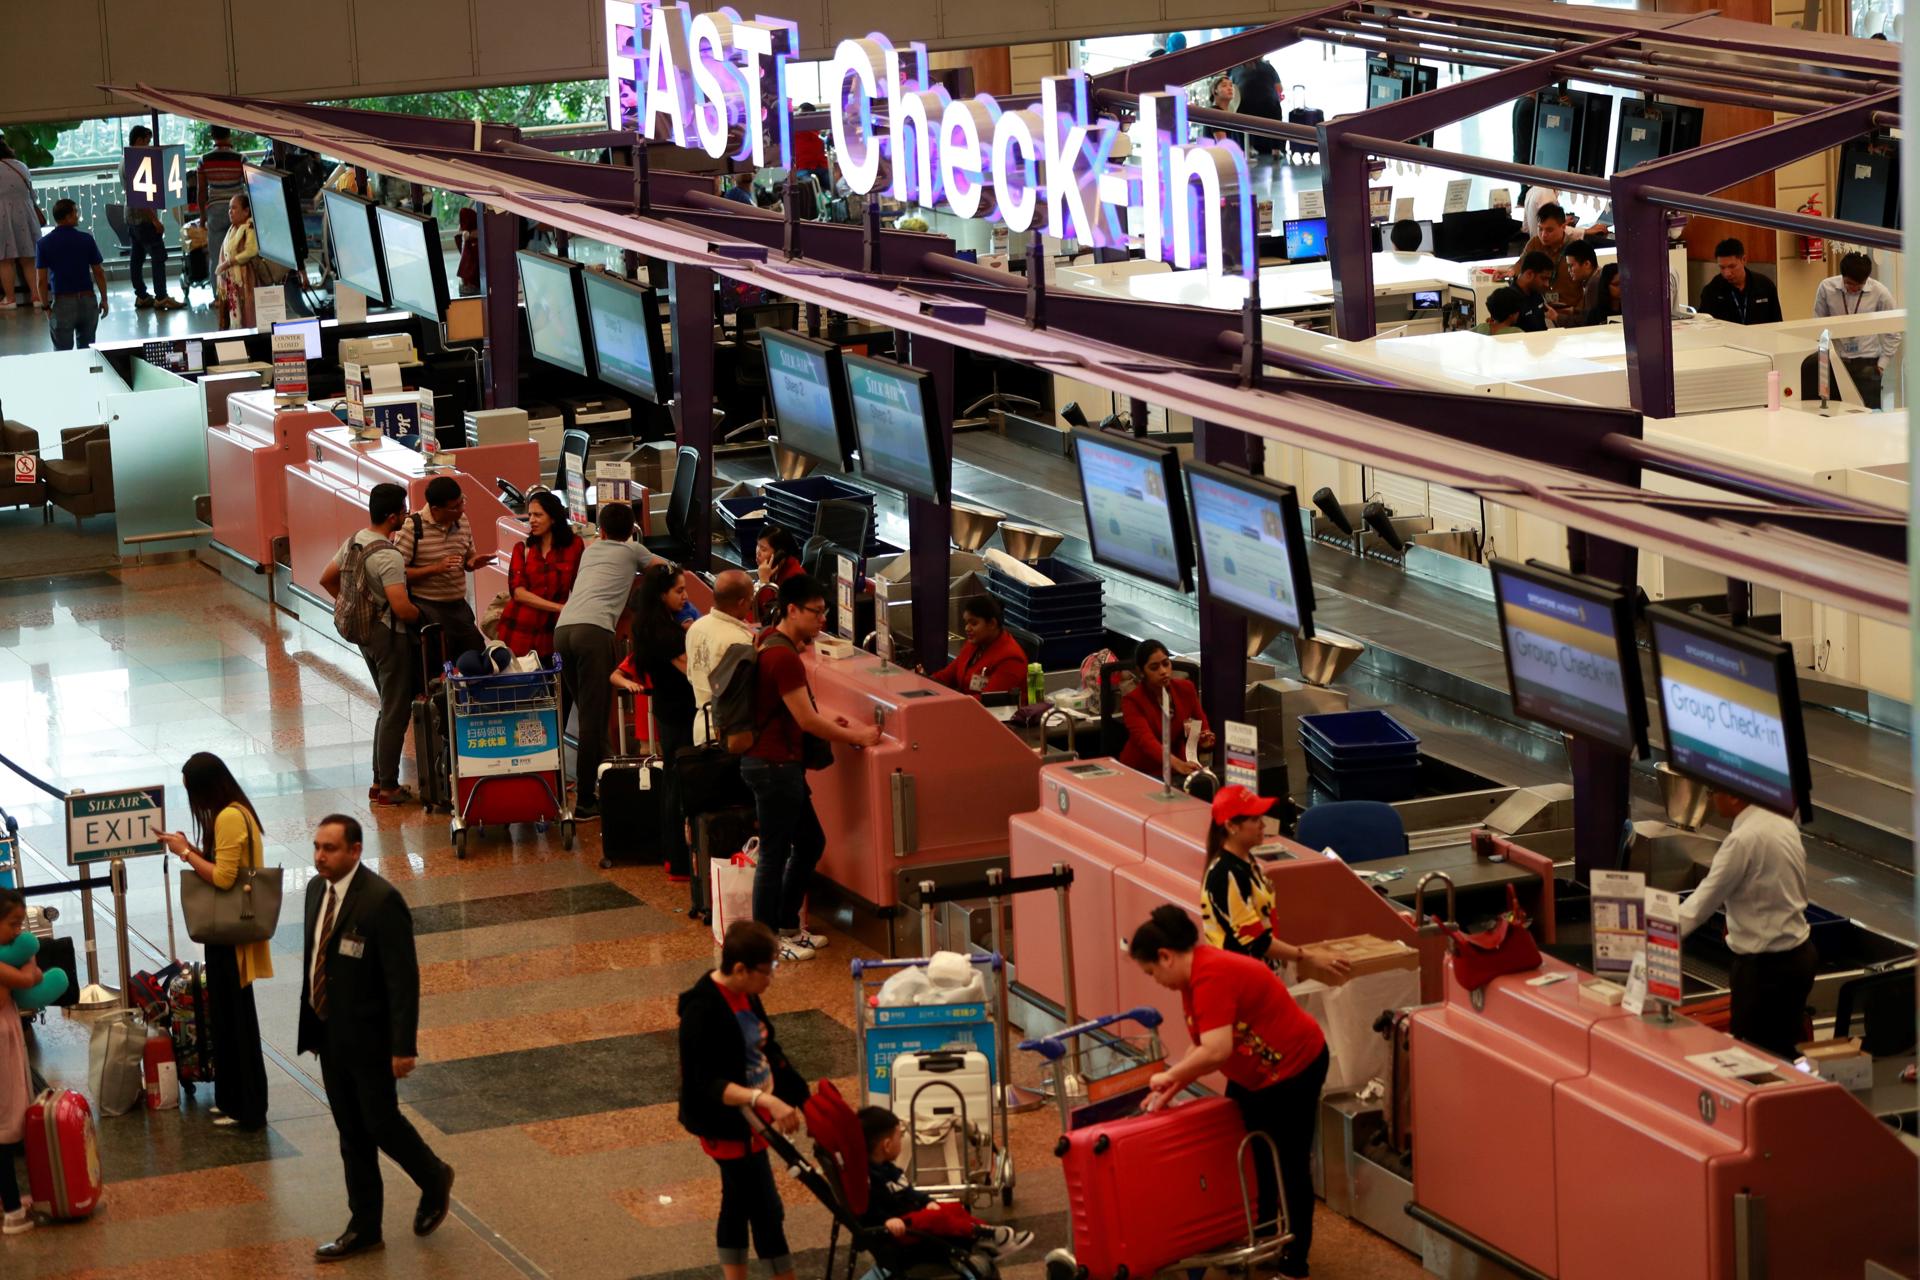 A file picture showing a general view of check-in counters at the departure hall of Terminal 2 in Changi Airport, Singapore. EPA/EFE/FILE/HOW HWEE YOUNG